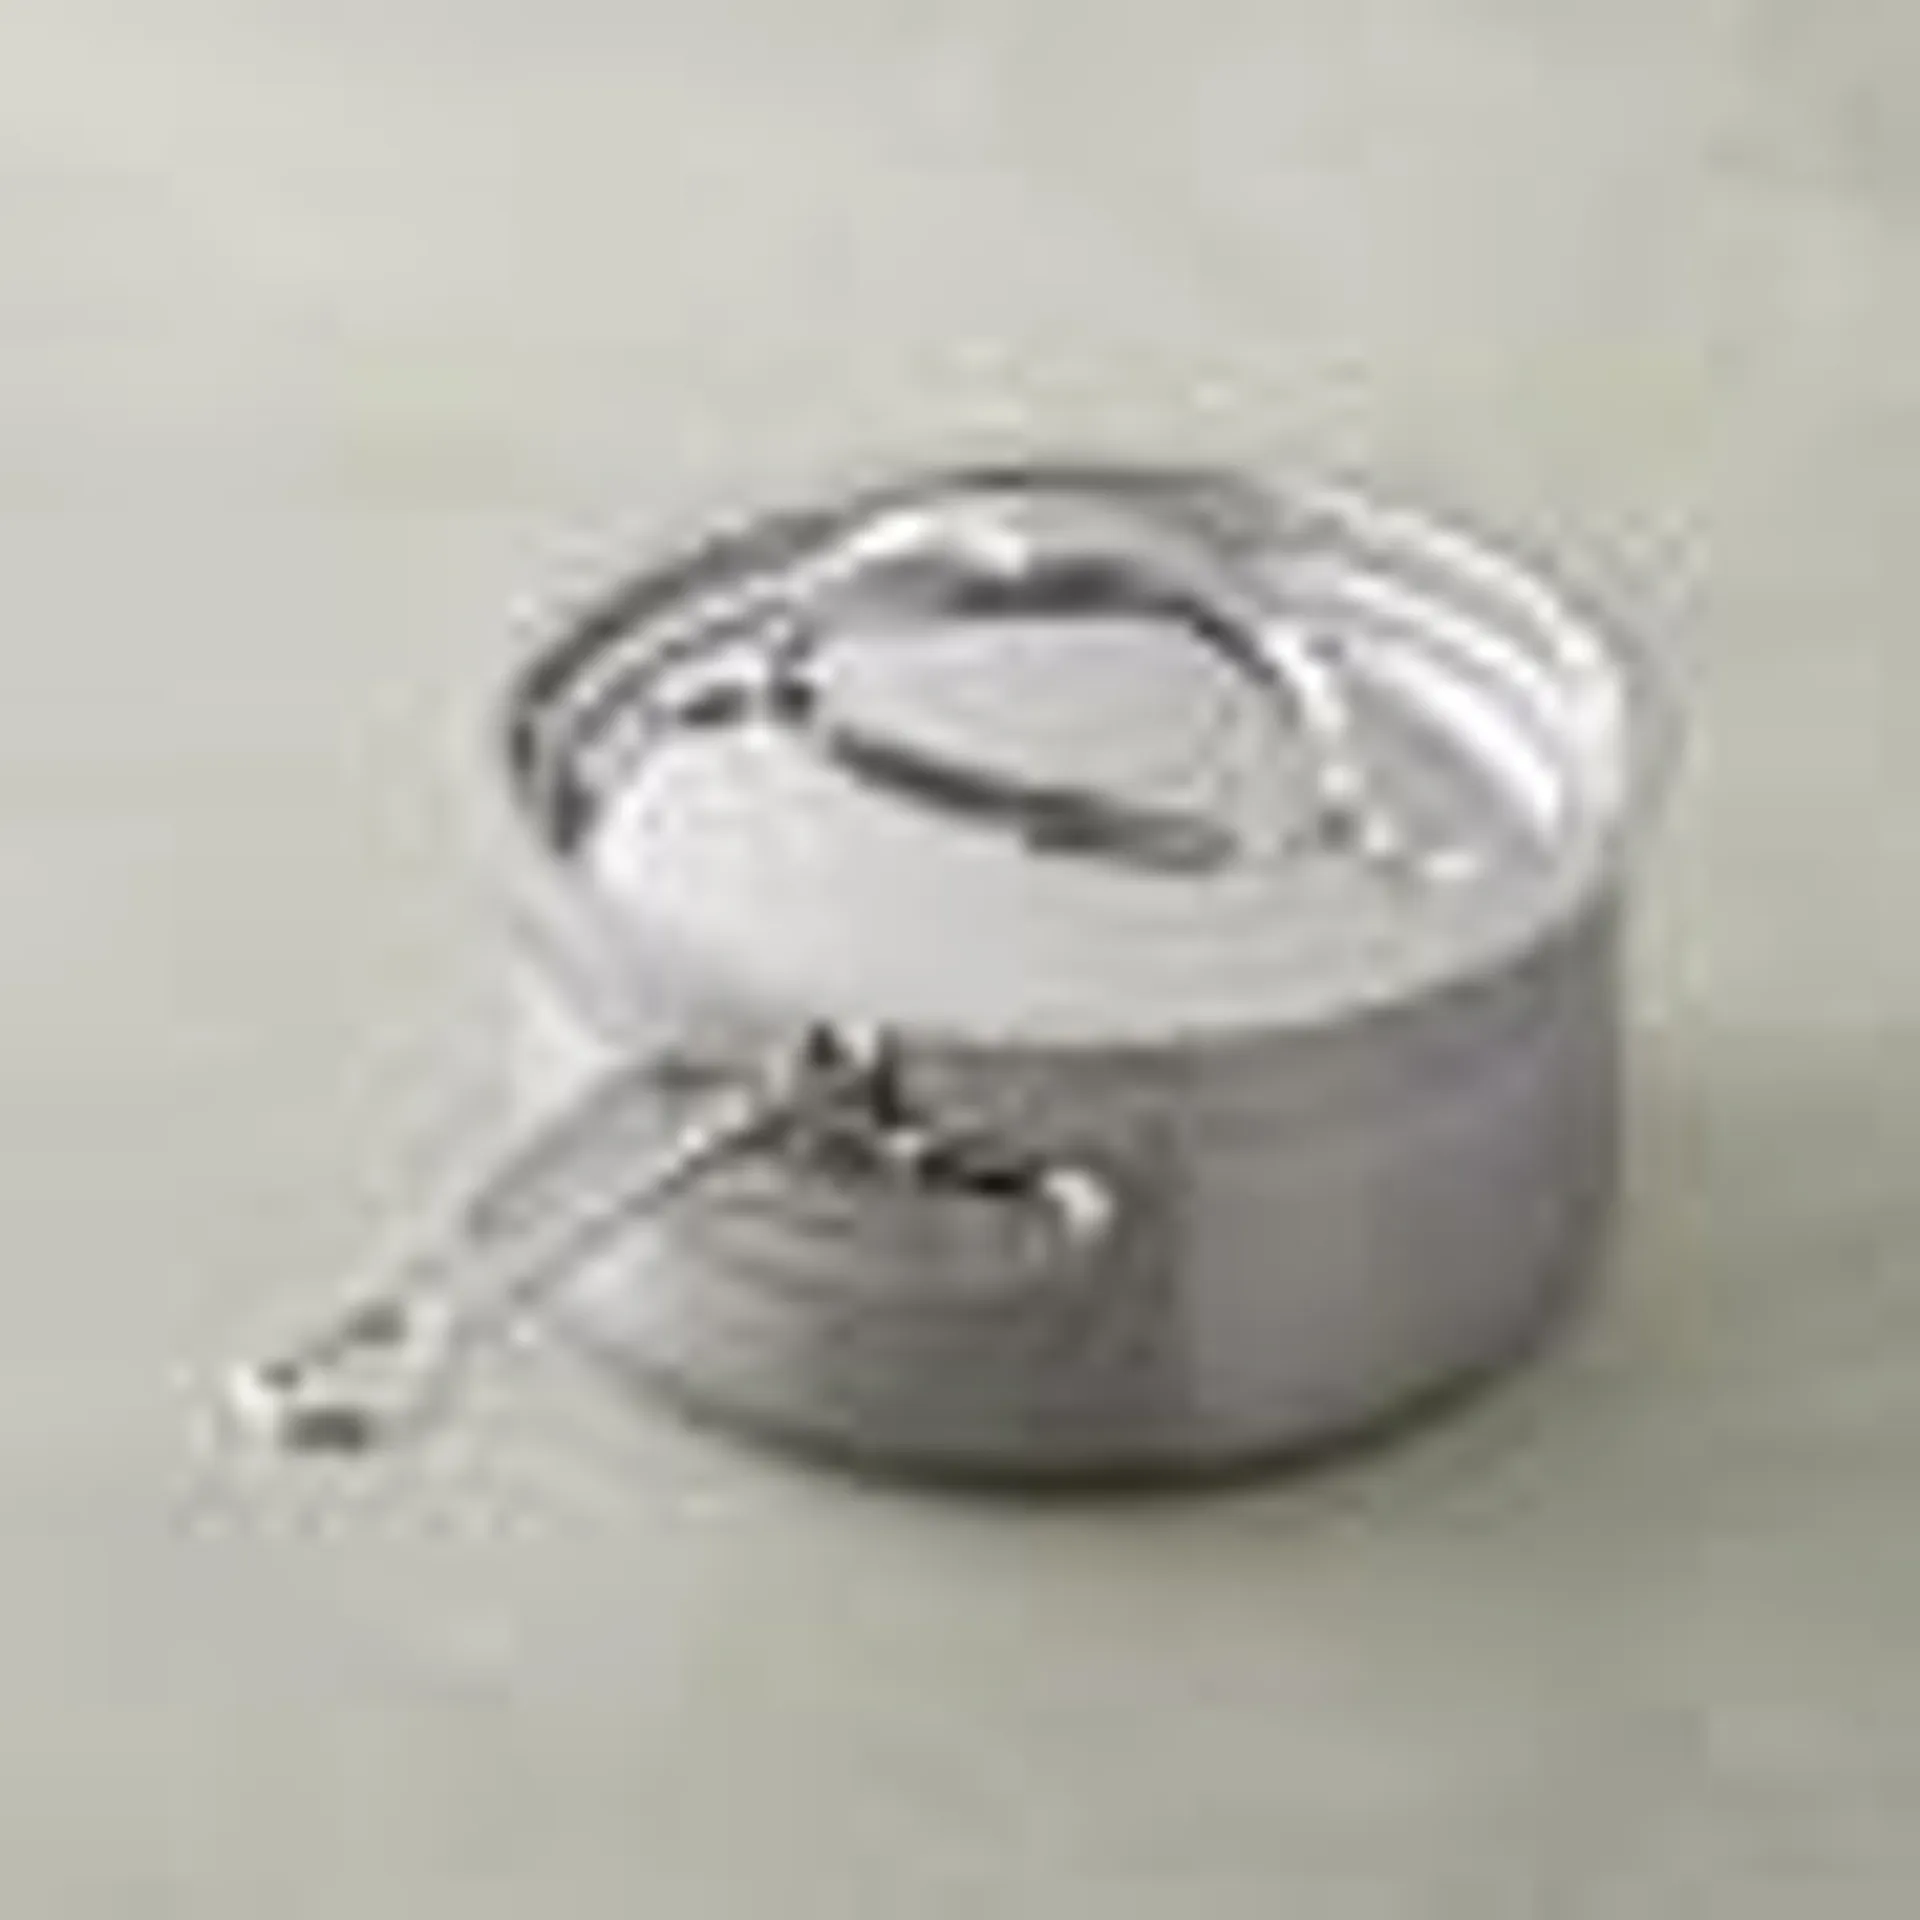 Hestan ProBond Professional Clad Stainless-Steel Covered Saucepan